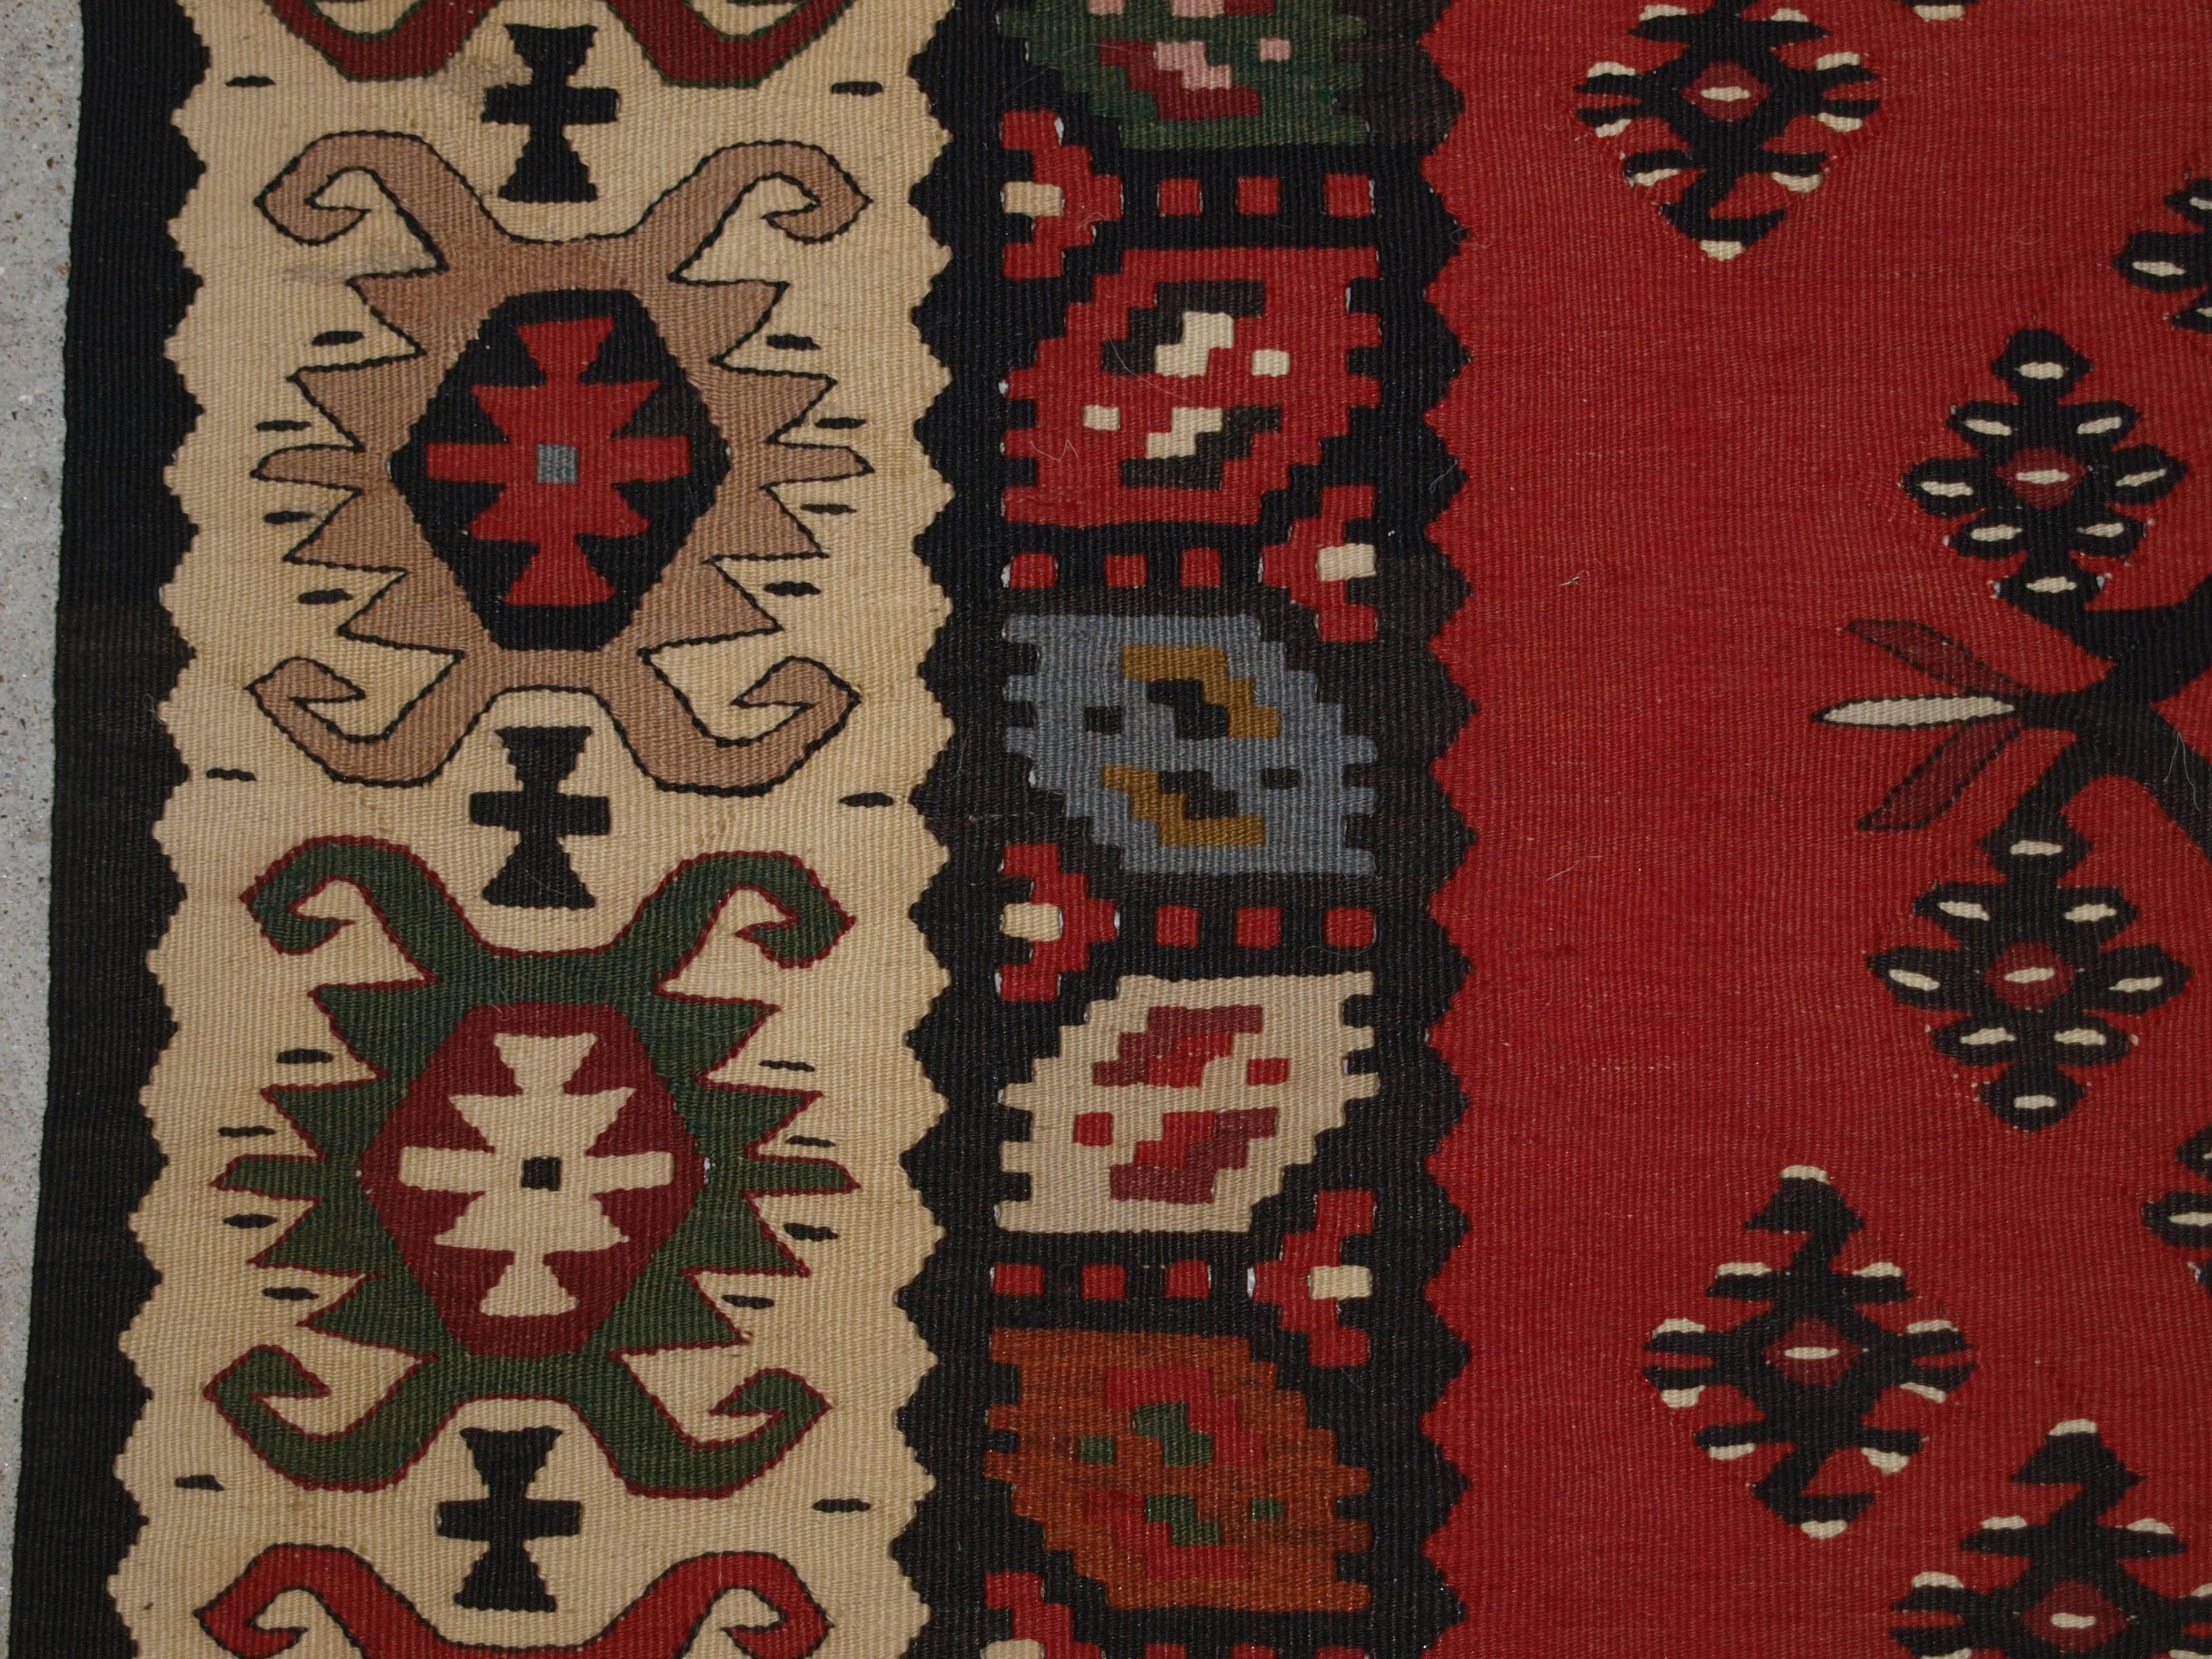 Old Turkish Sarkoy Kilim rug, traditional design on soft red ground, good ivory border, circa 1920.
Size: 8ft 10in x 4ft 6in (268 x 136cm).

Old Anatolian Sharkoy Kilim, Western Turkey of traditional design on a very soft red ground.

 